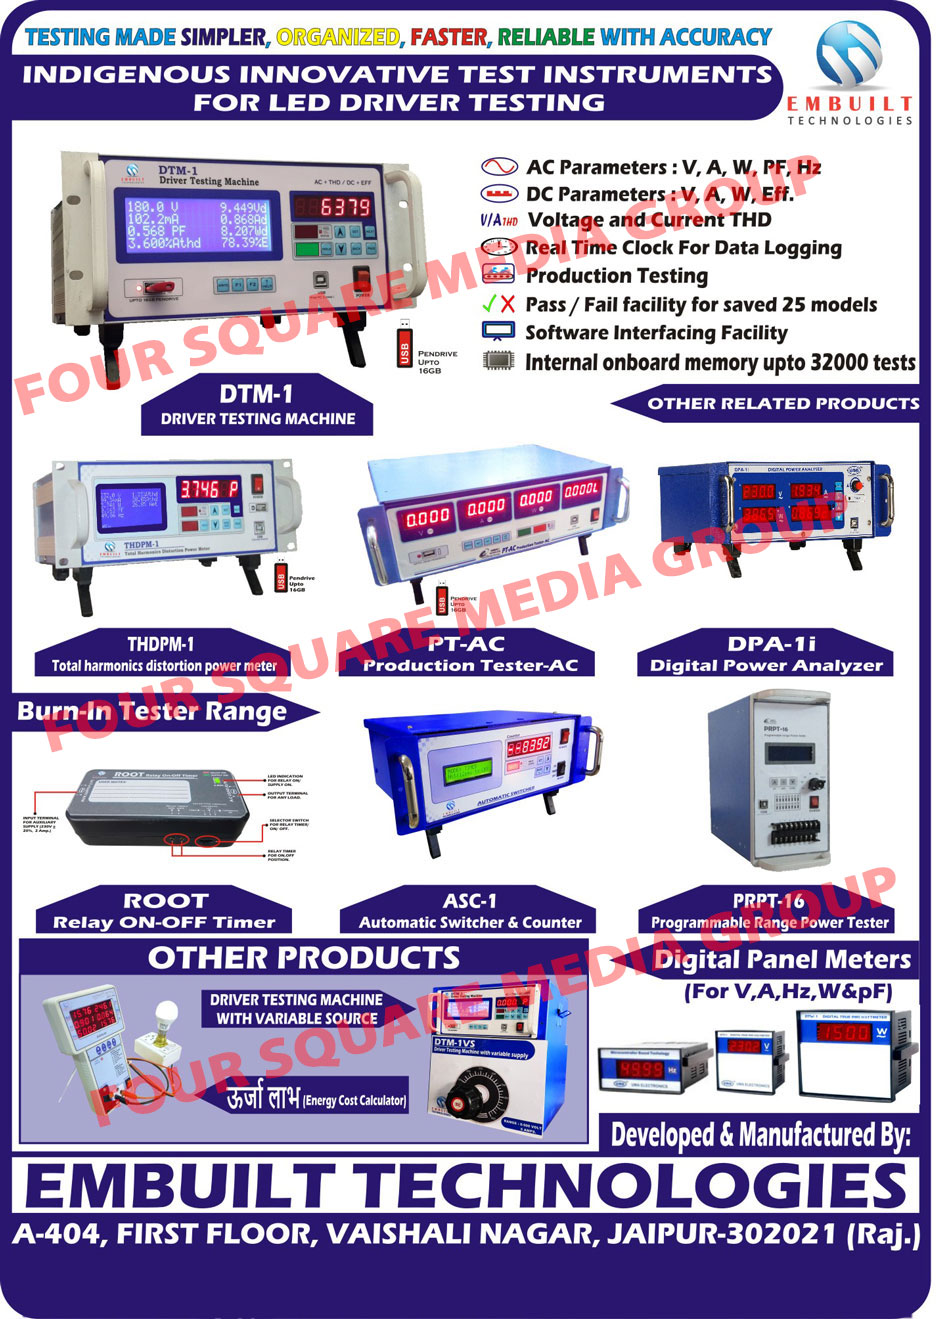 Led Driver Testing Instruments, Driver Testing Machine, Digital Panel Meter, Programmable Range Power Tester, Automatic Switcher, Automatic Counter, Relay On Off Timer, Digital Power Analyzer, AC Production Tester, Total Harmonic Distortion Power Meter